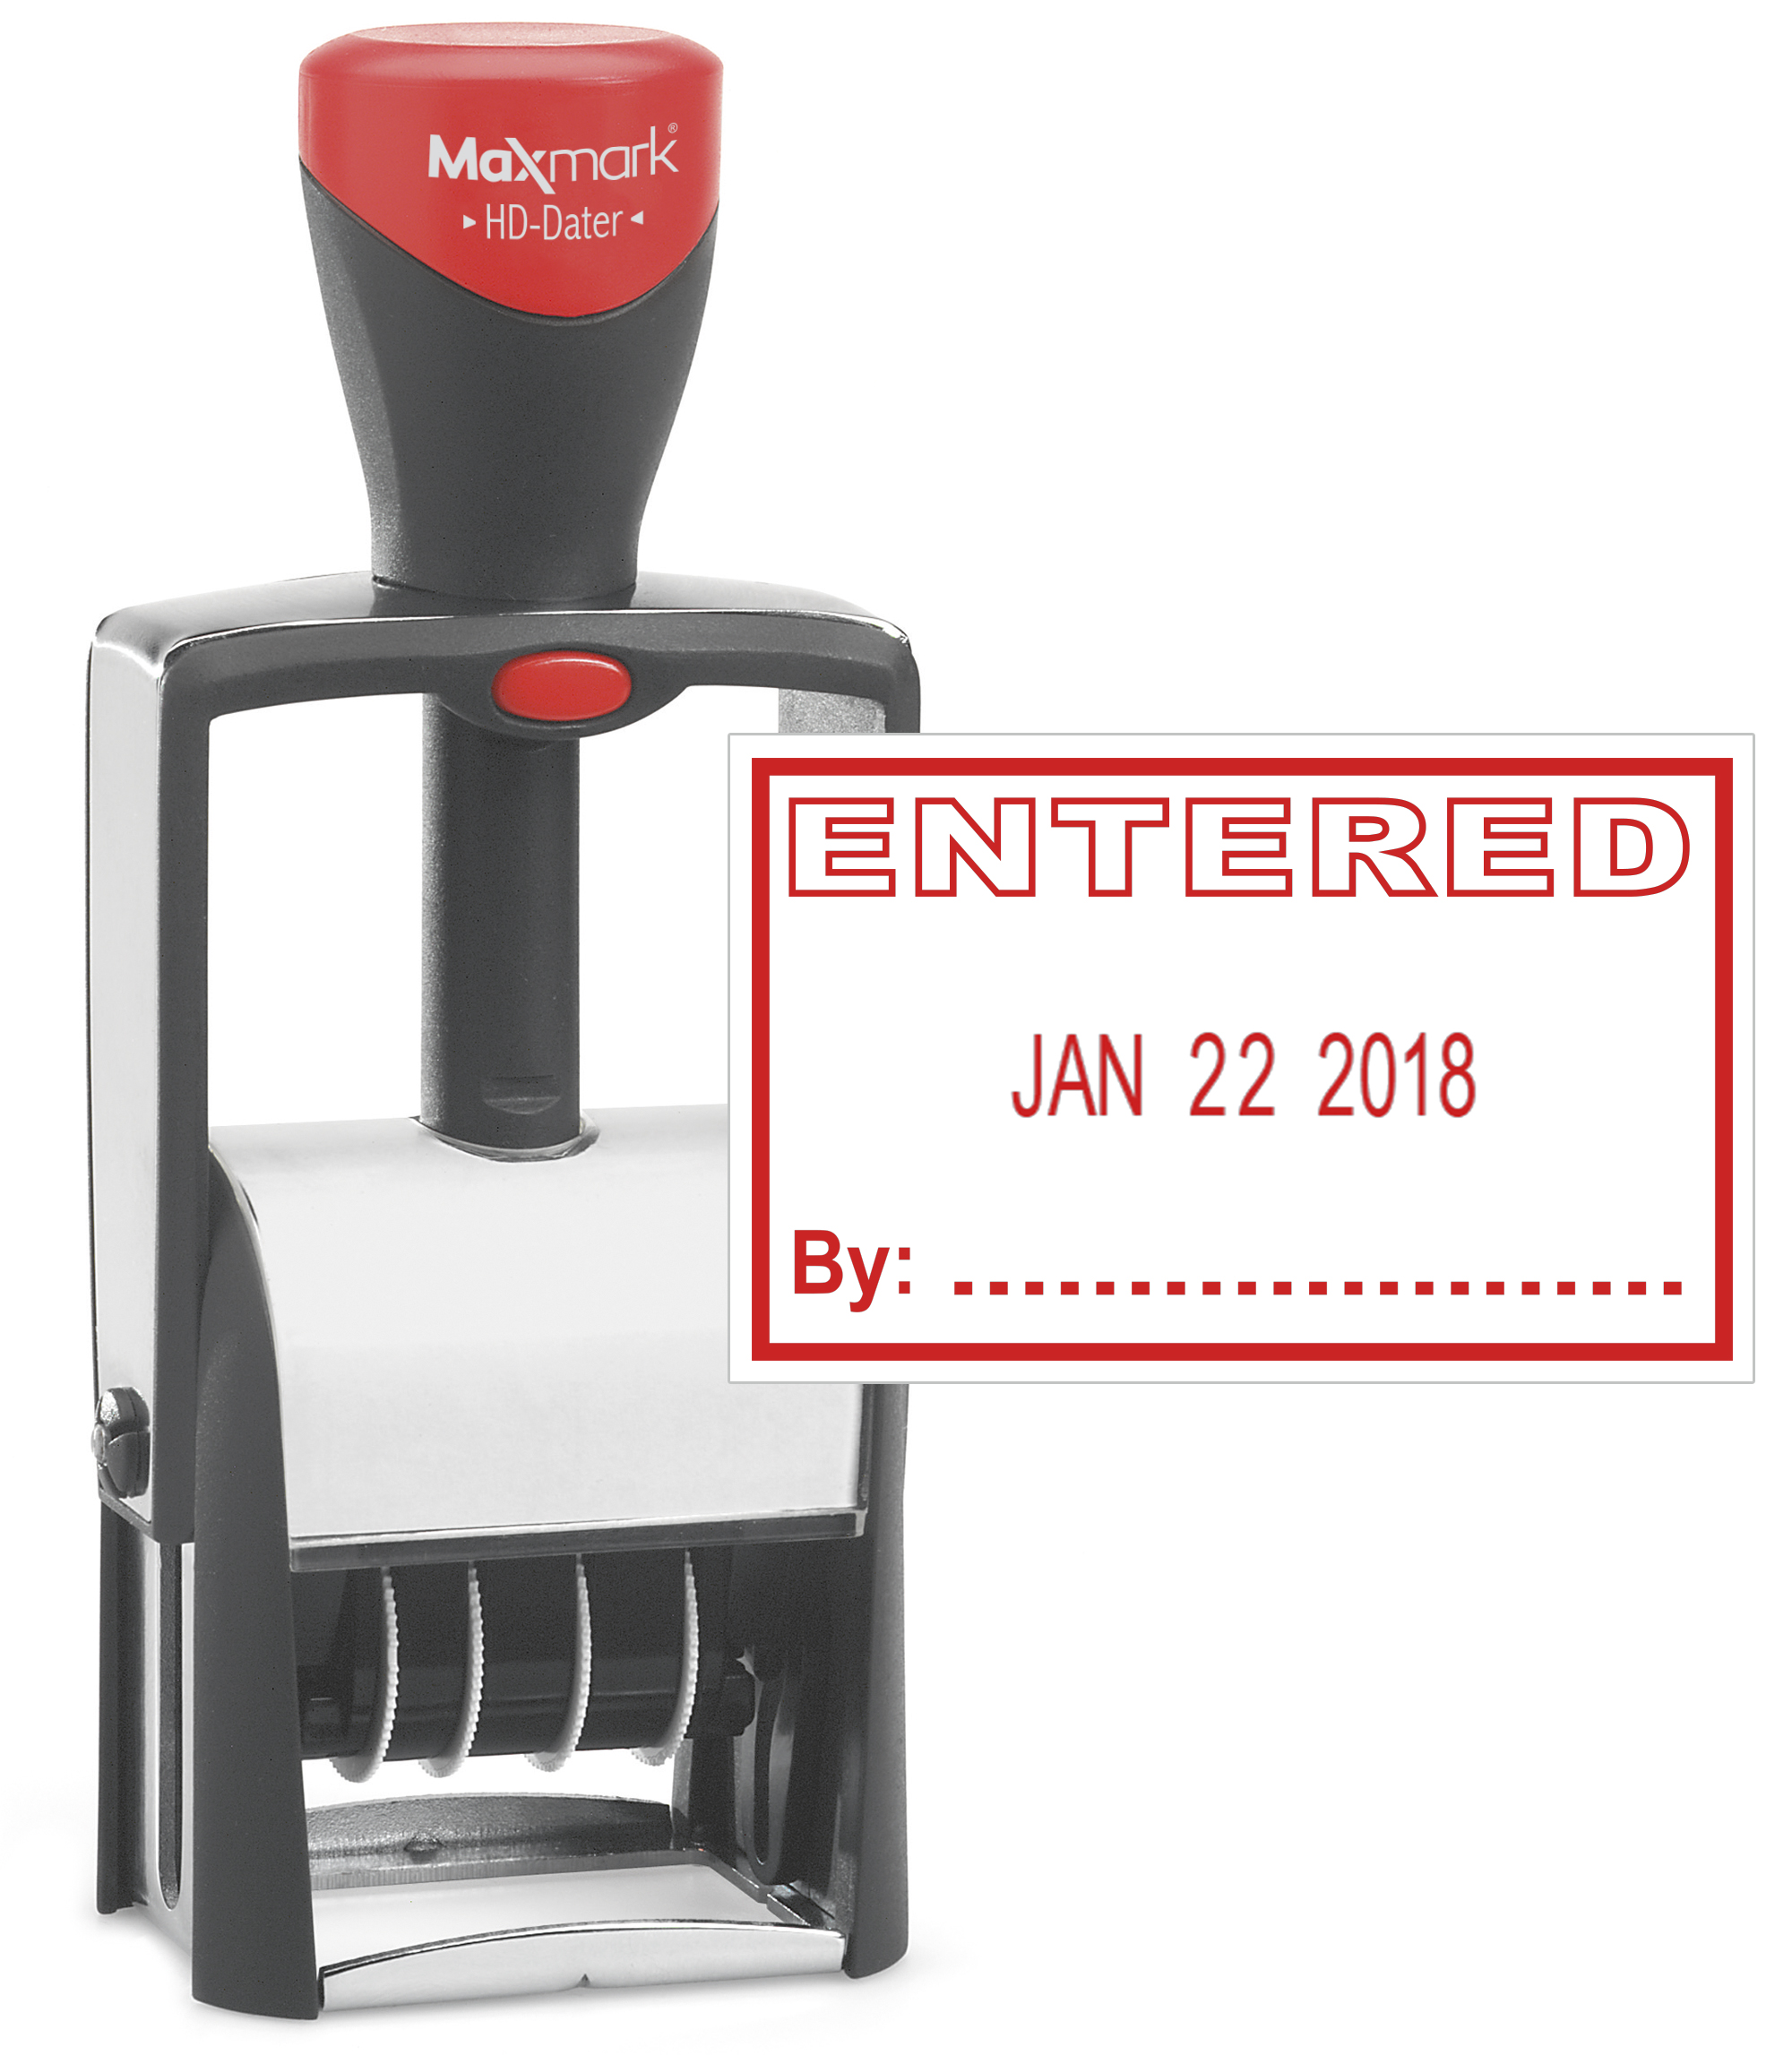 Heavy Duty Date Stamp with "ENTERED" Self Inking Stamp - RED Ink